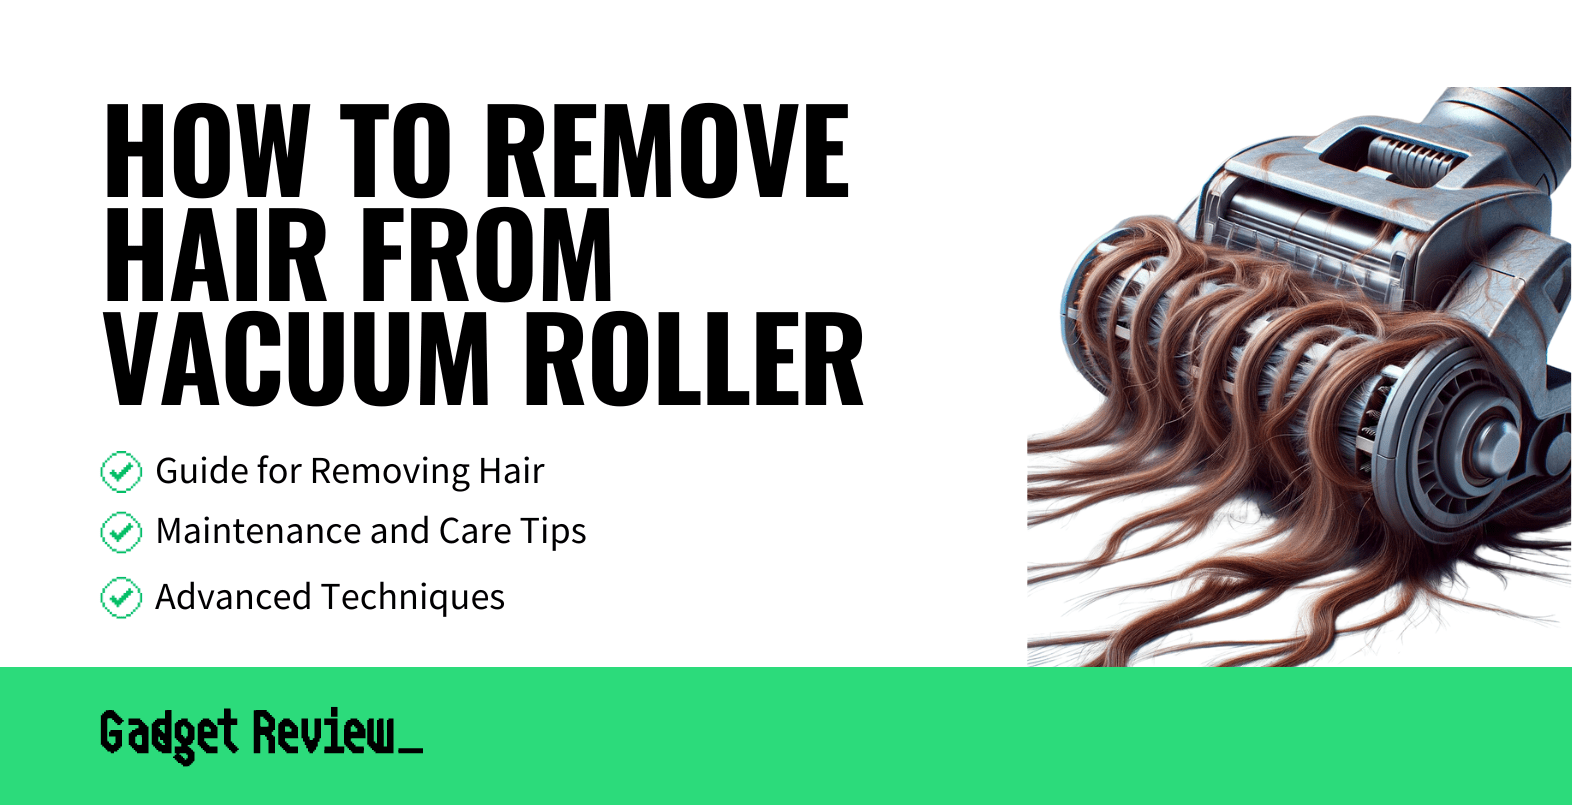 How to Remove Hair from a Vacuum Roller